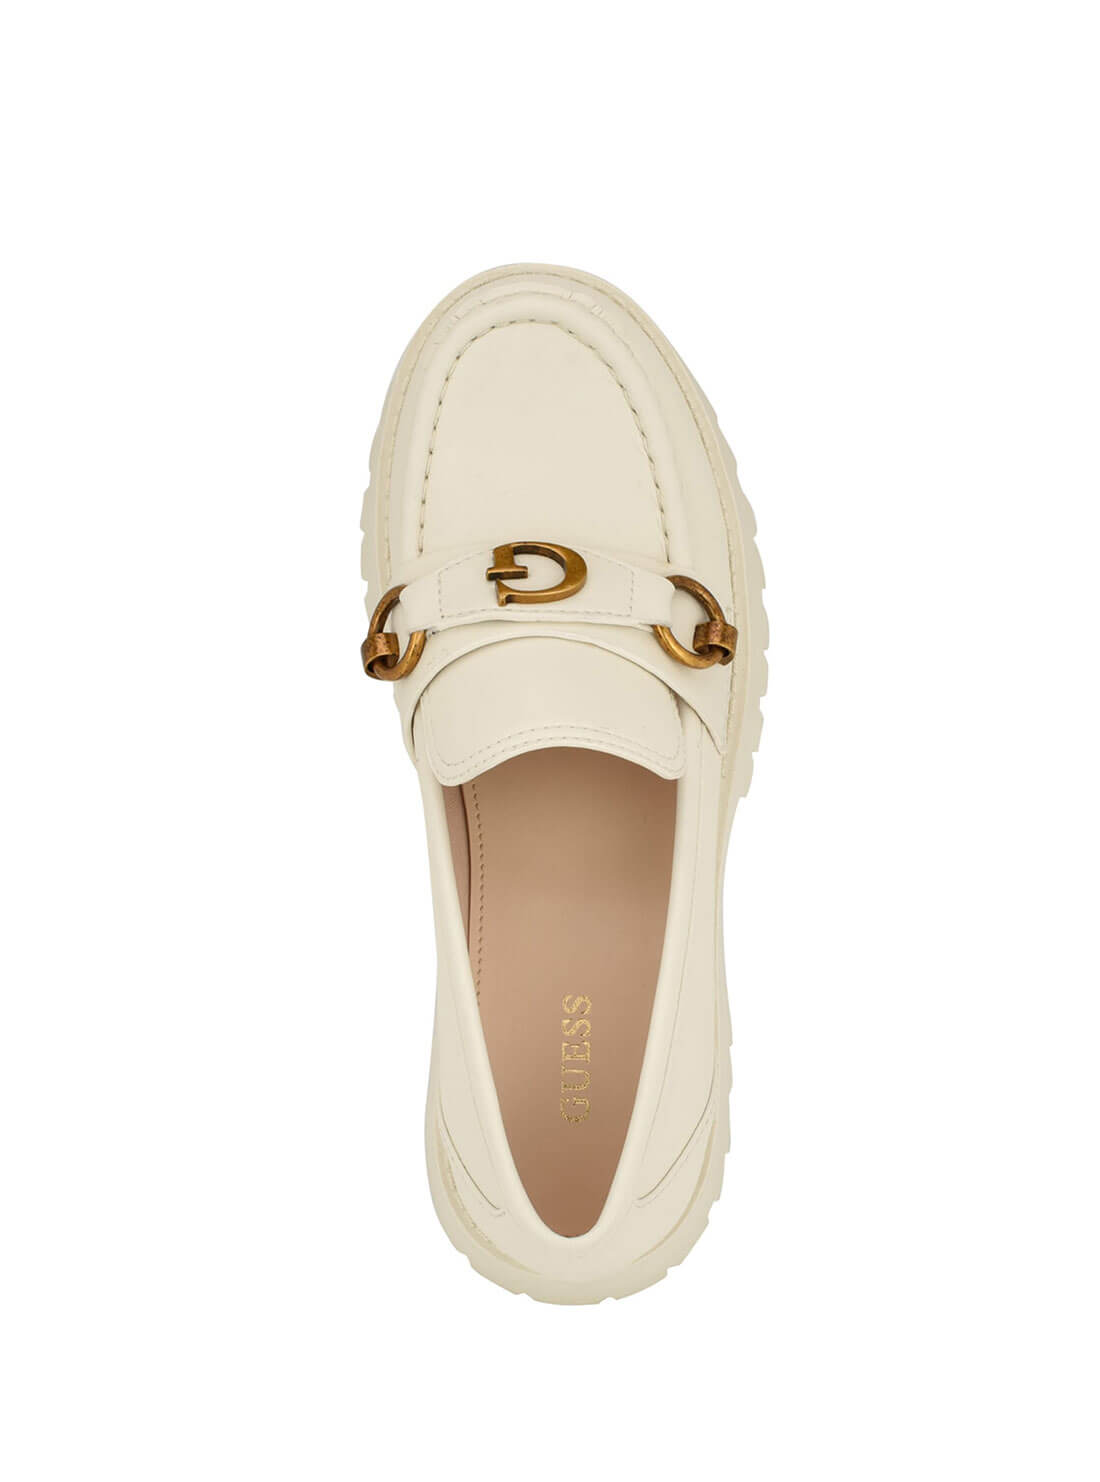 White Almost Loafers | GUESS Women's Shoes | top view 